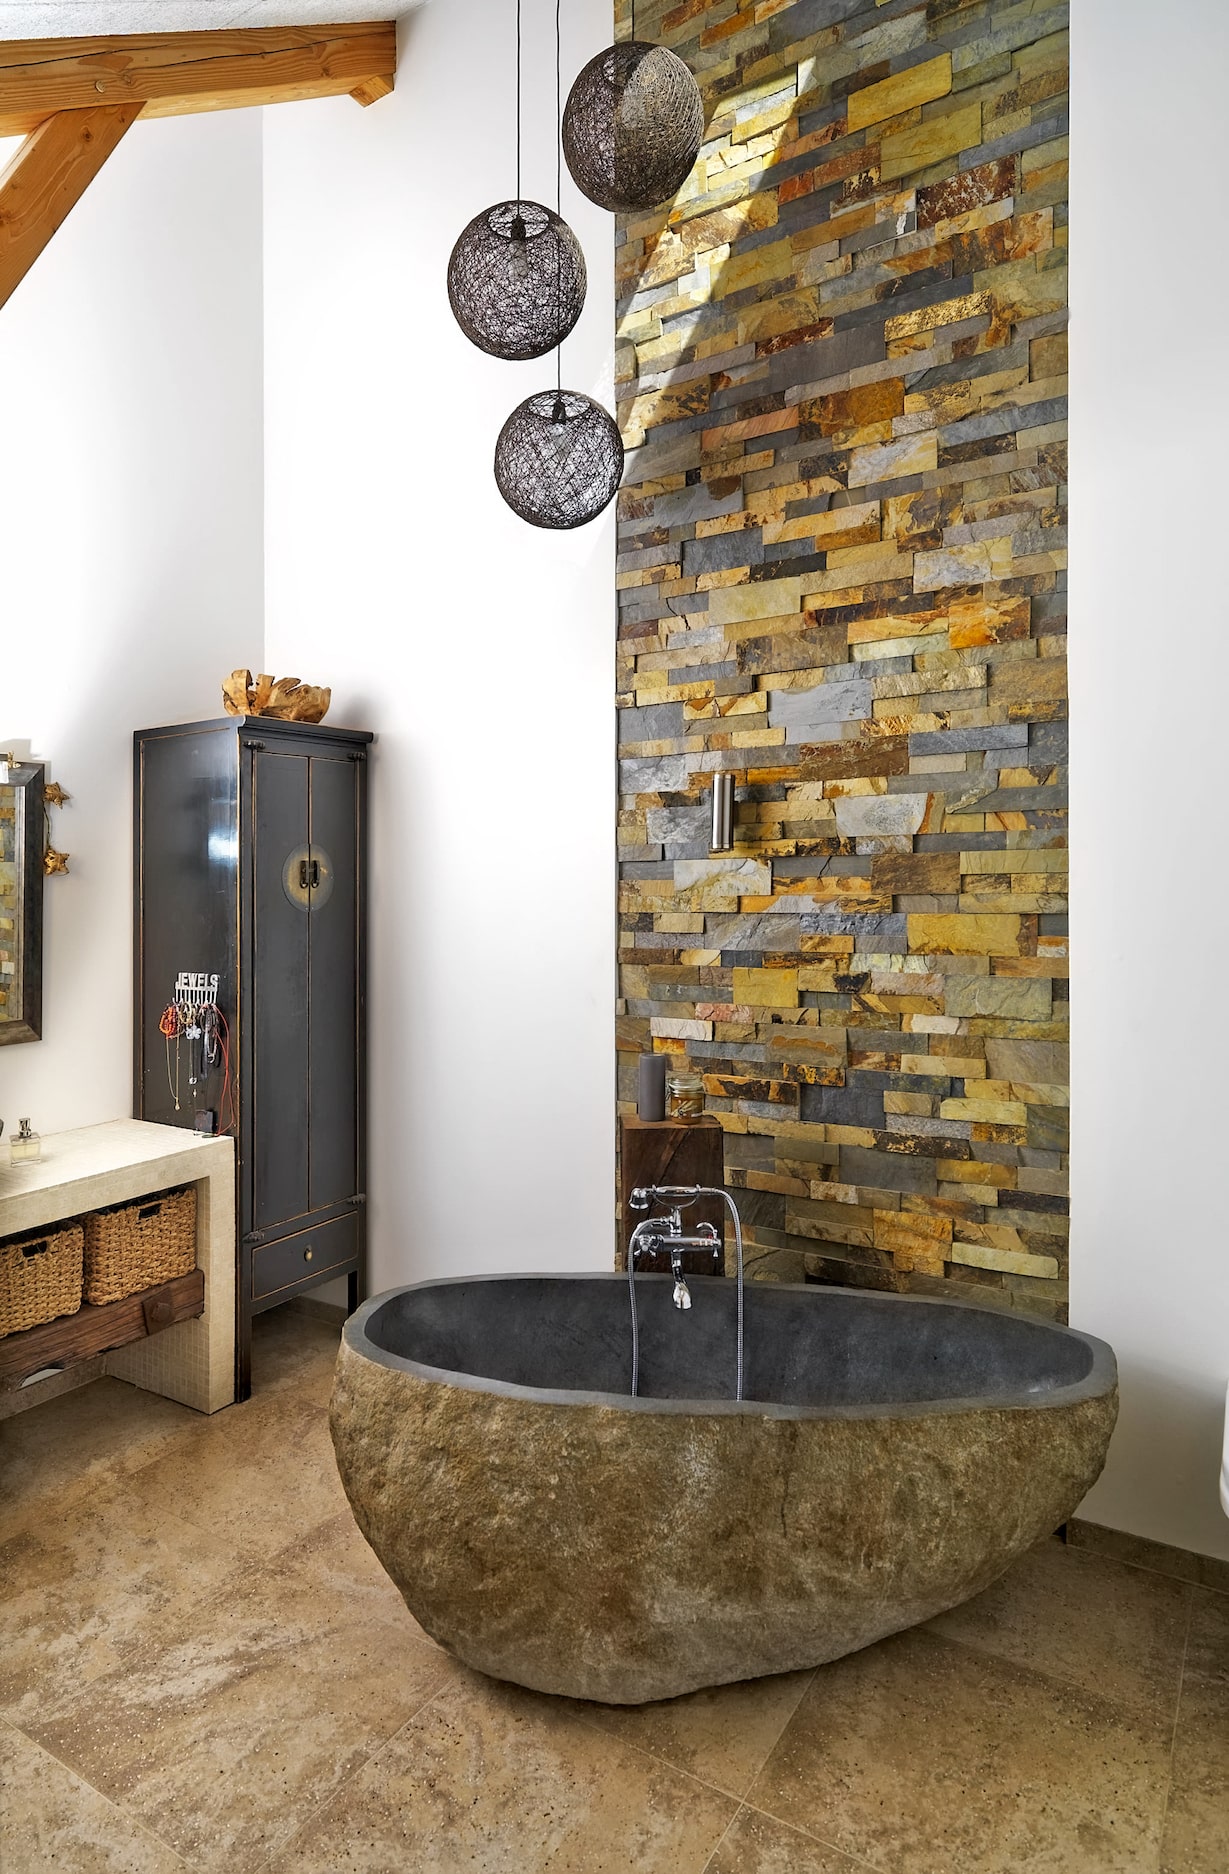 A super unique stone bathroom featuring a floor to ceiling stacked stone feature wall and a freestanding one piece natural stone tub.